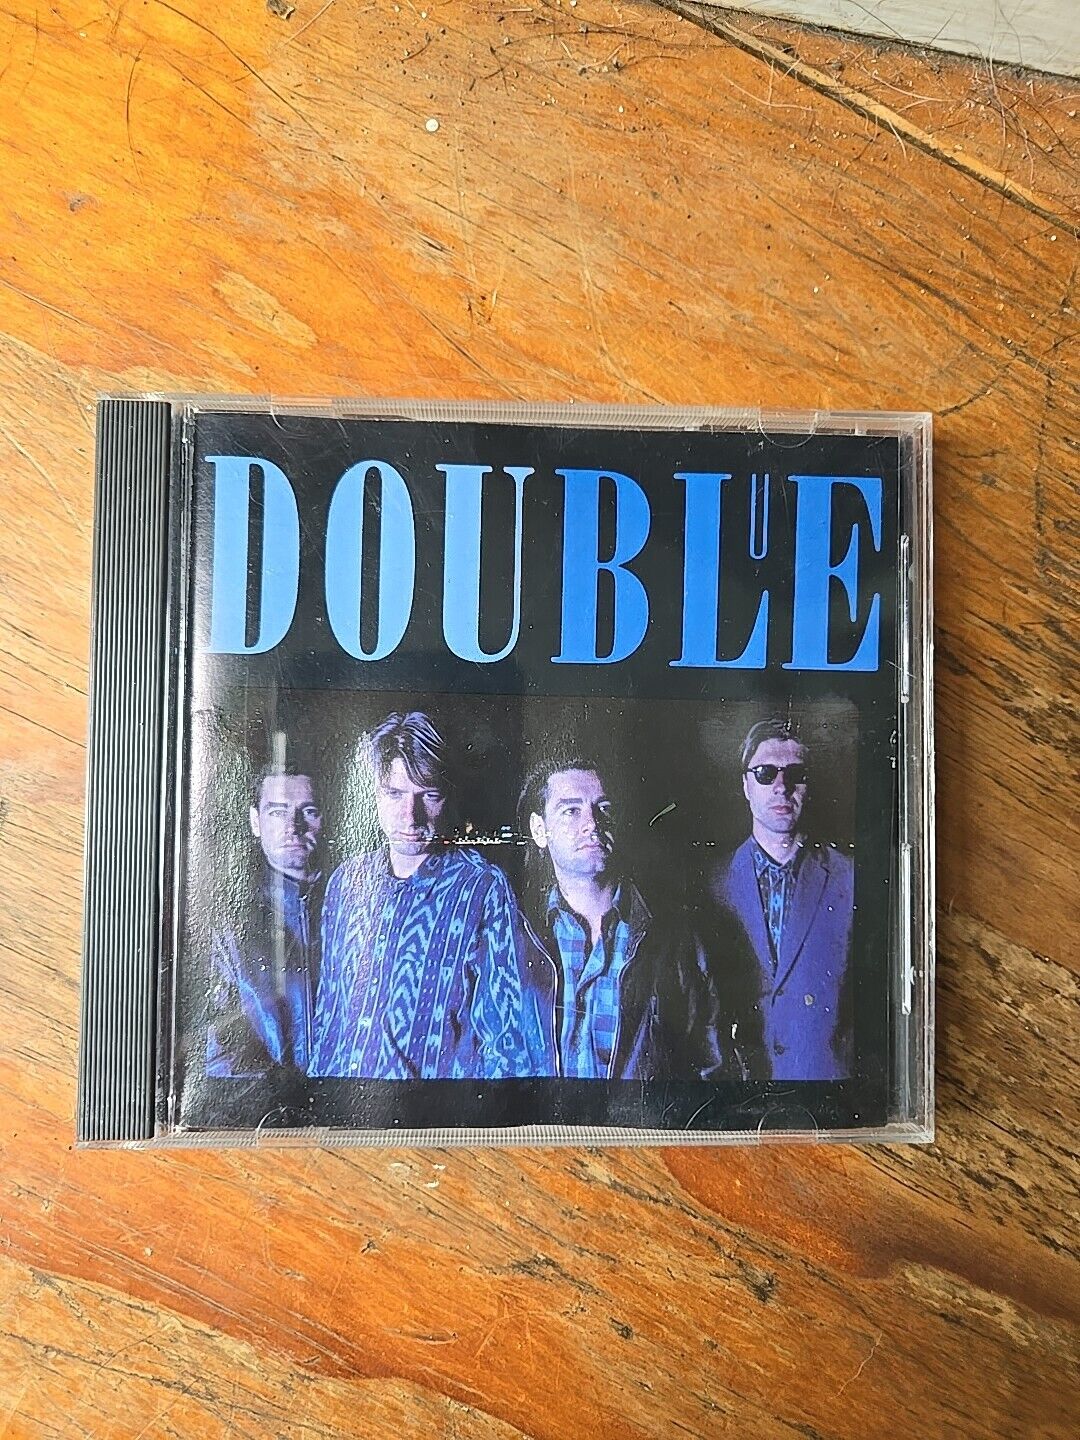 DOUBLE - BLUE (1986) A&M RECORDS - CD 5133 / DX 640